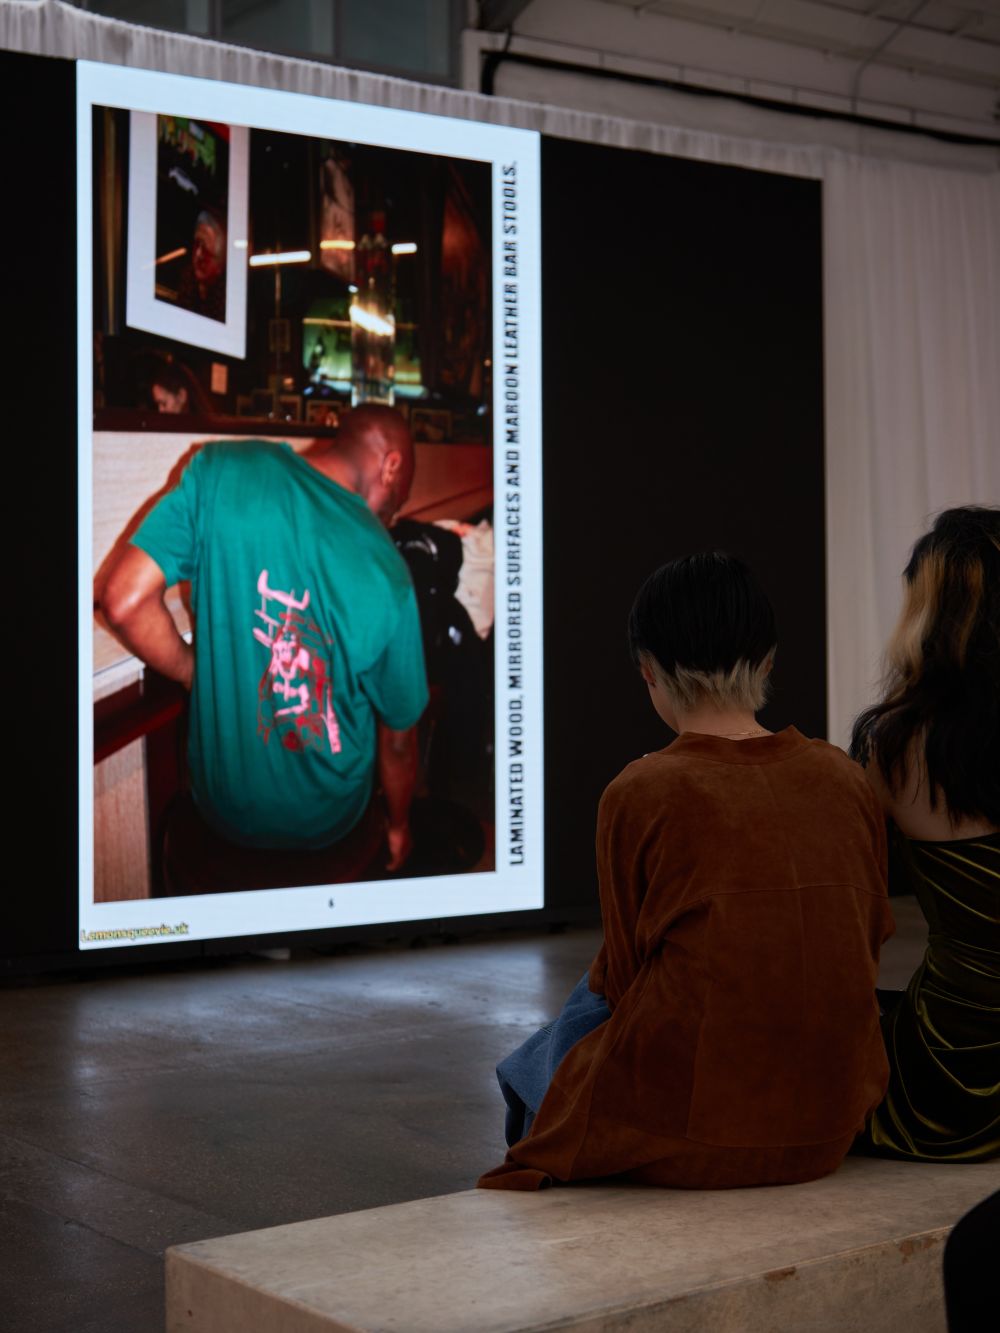 Crowd looking at screen of a person in a green shirt looking down towards the floor